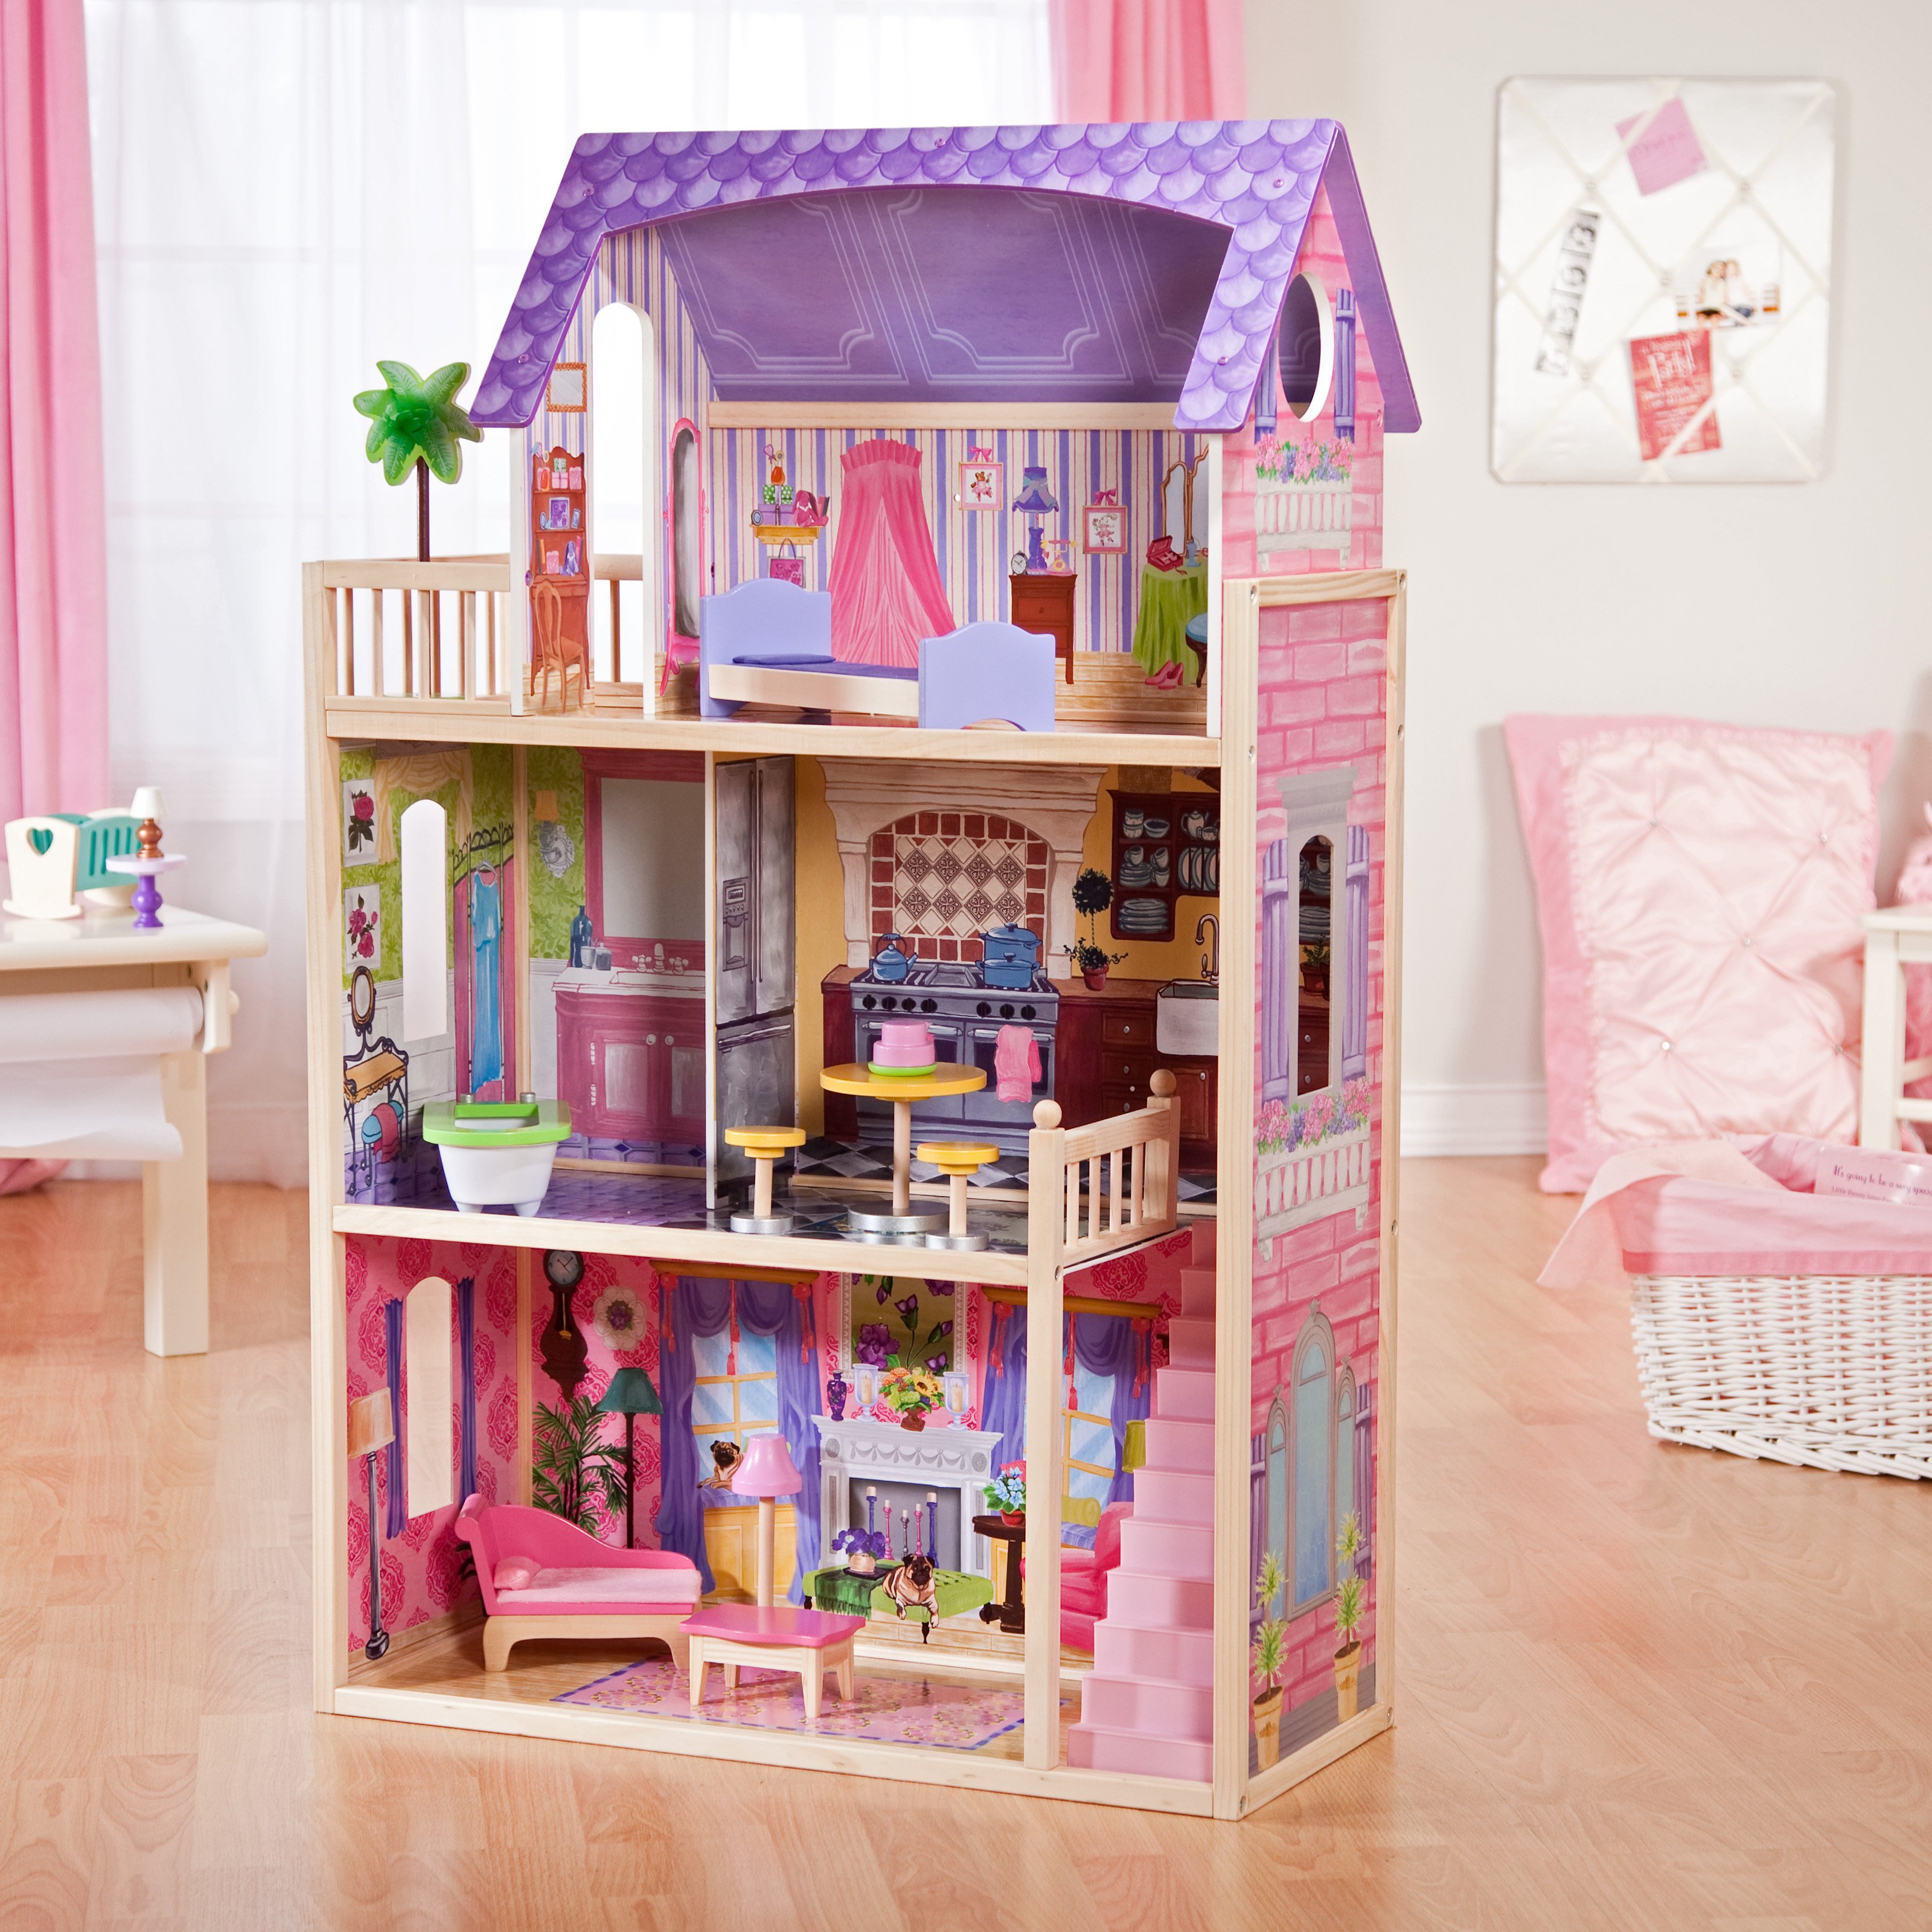 Doll House Wallpaper Best Auto Res